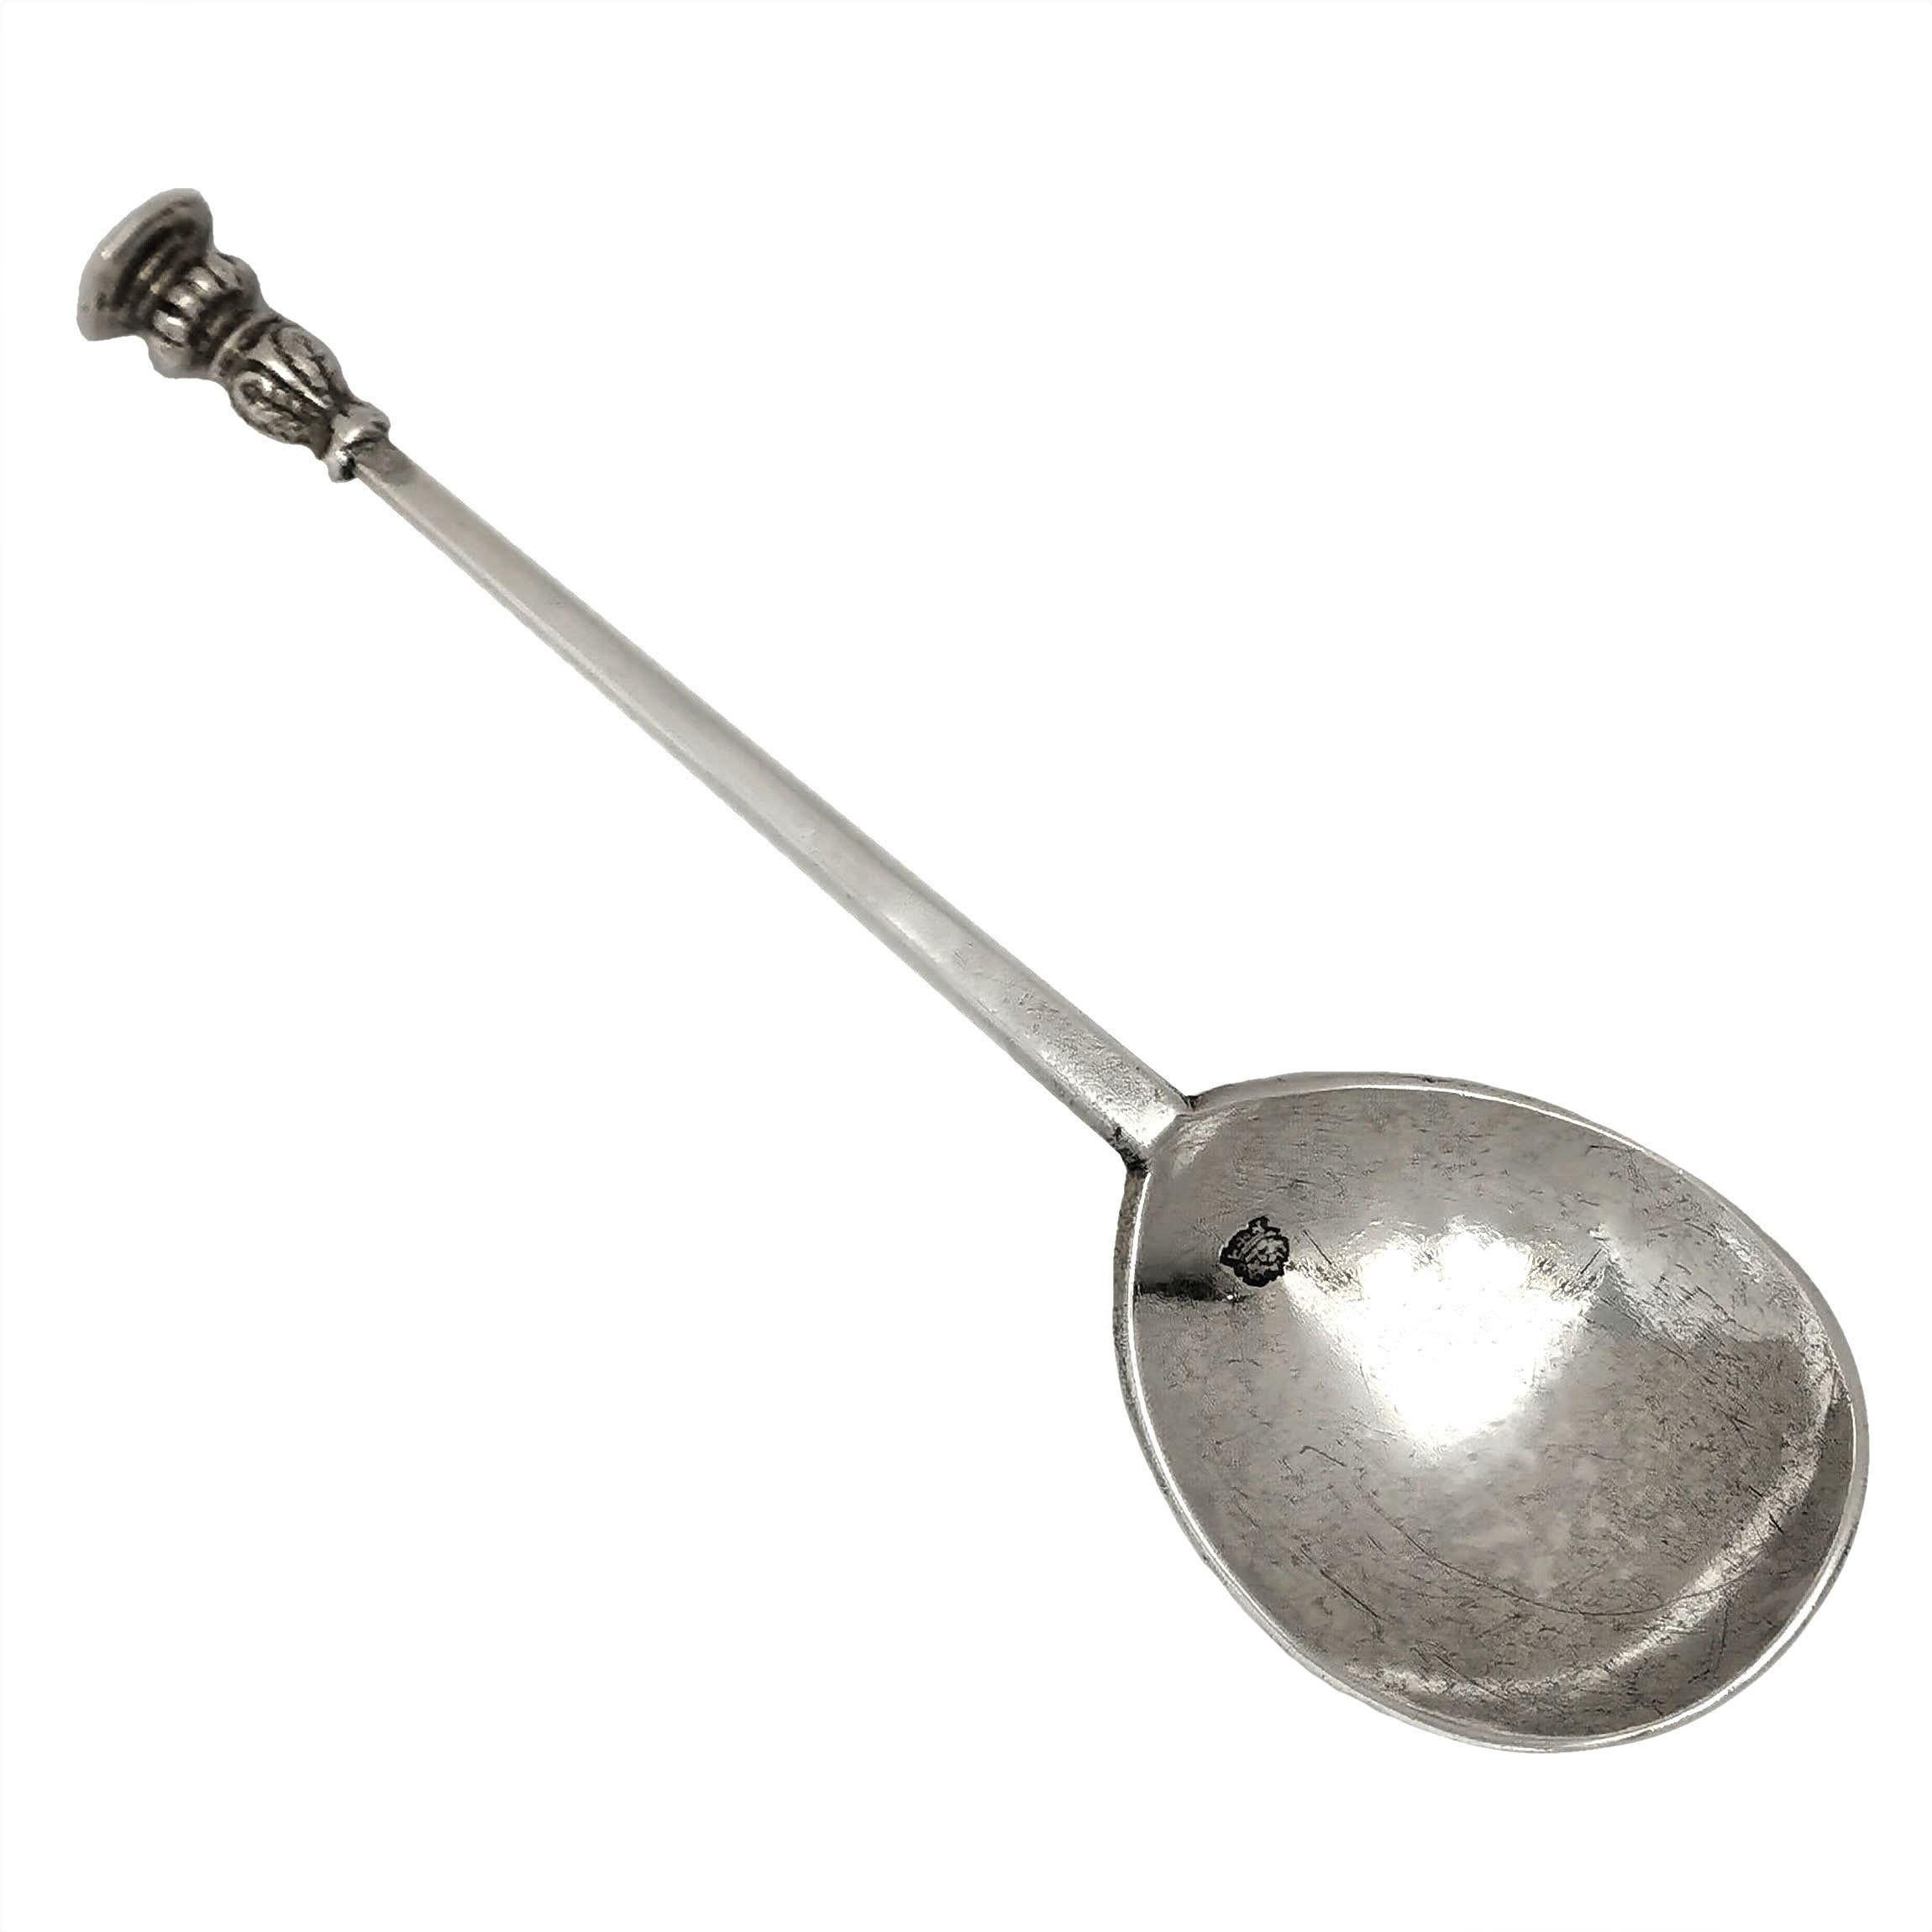 A traditional Antique Charles I Silver Seal Top Spoon with a fig shaped bowl and a subtly hexagonal handled ending in a knopped Seal. The Seal is engraved with the initials EB.

Made in London, UK in 1642 by IF

Approx. Weight - 60g
Approx. Length -